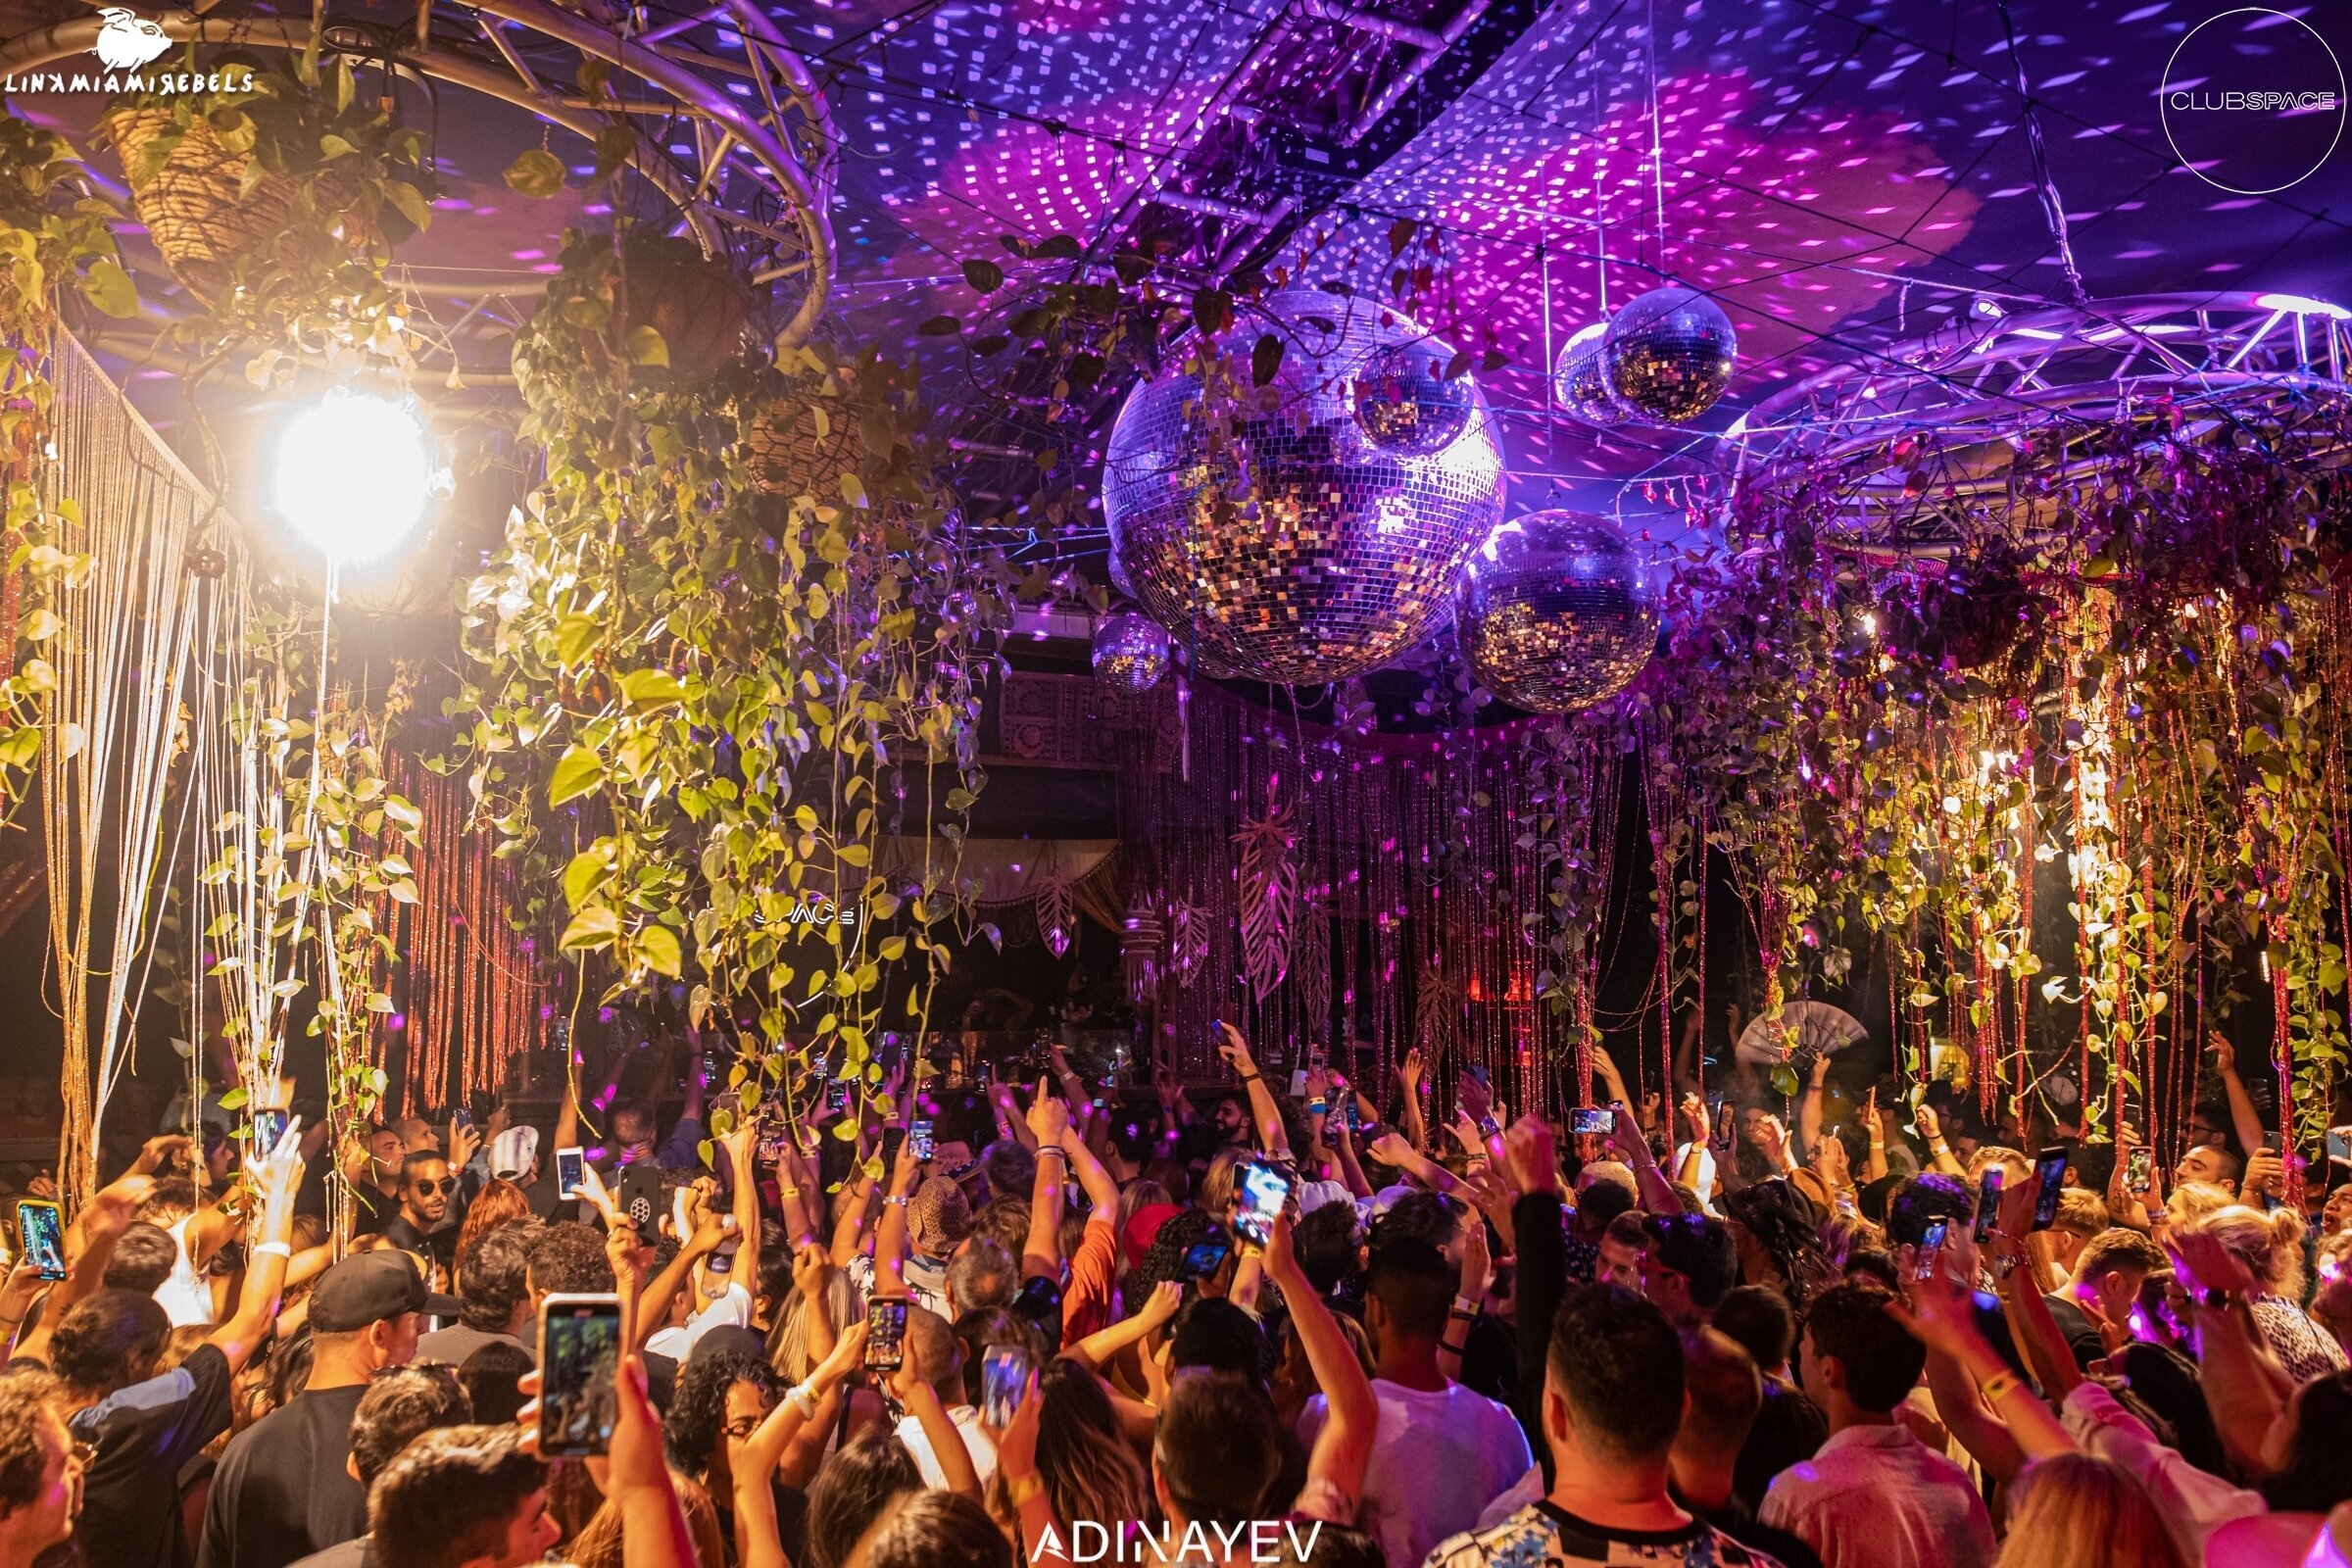 Miami Club dress code: Things You Need To Know